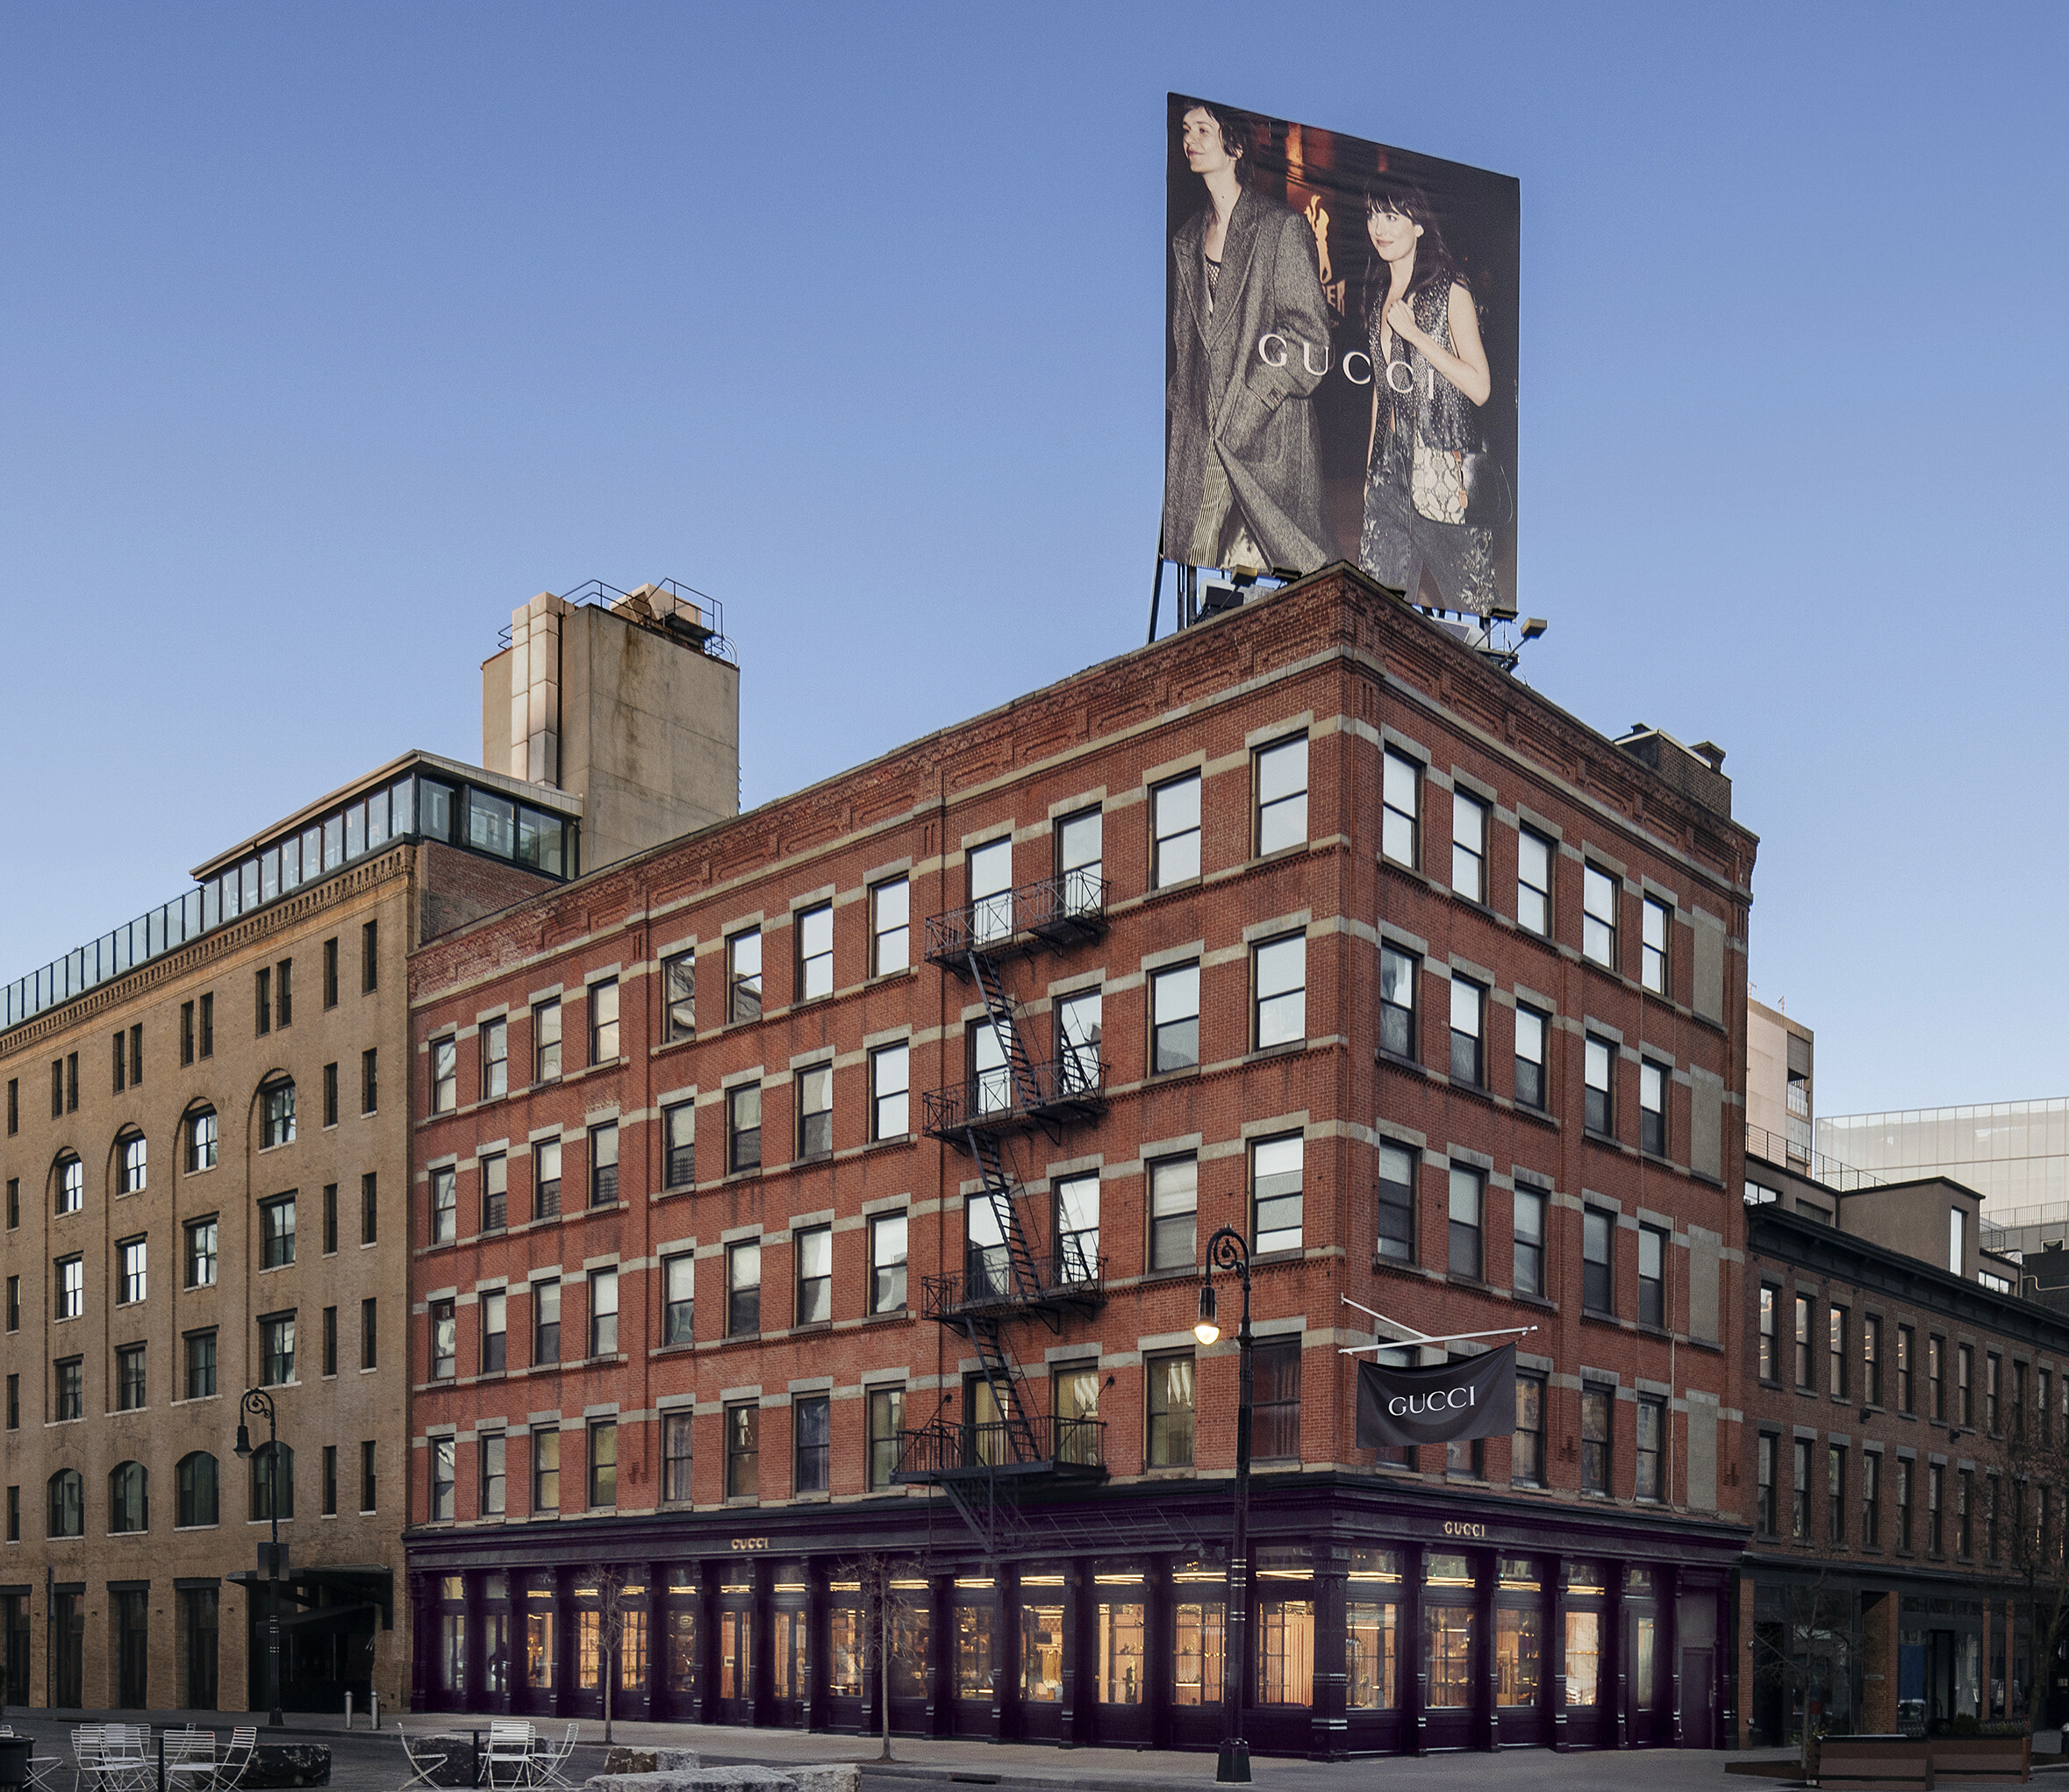 World's Largest Gucci Store: Gucci New York Fifth Avenue Flagship